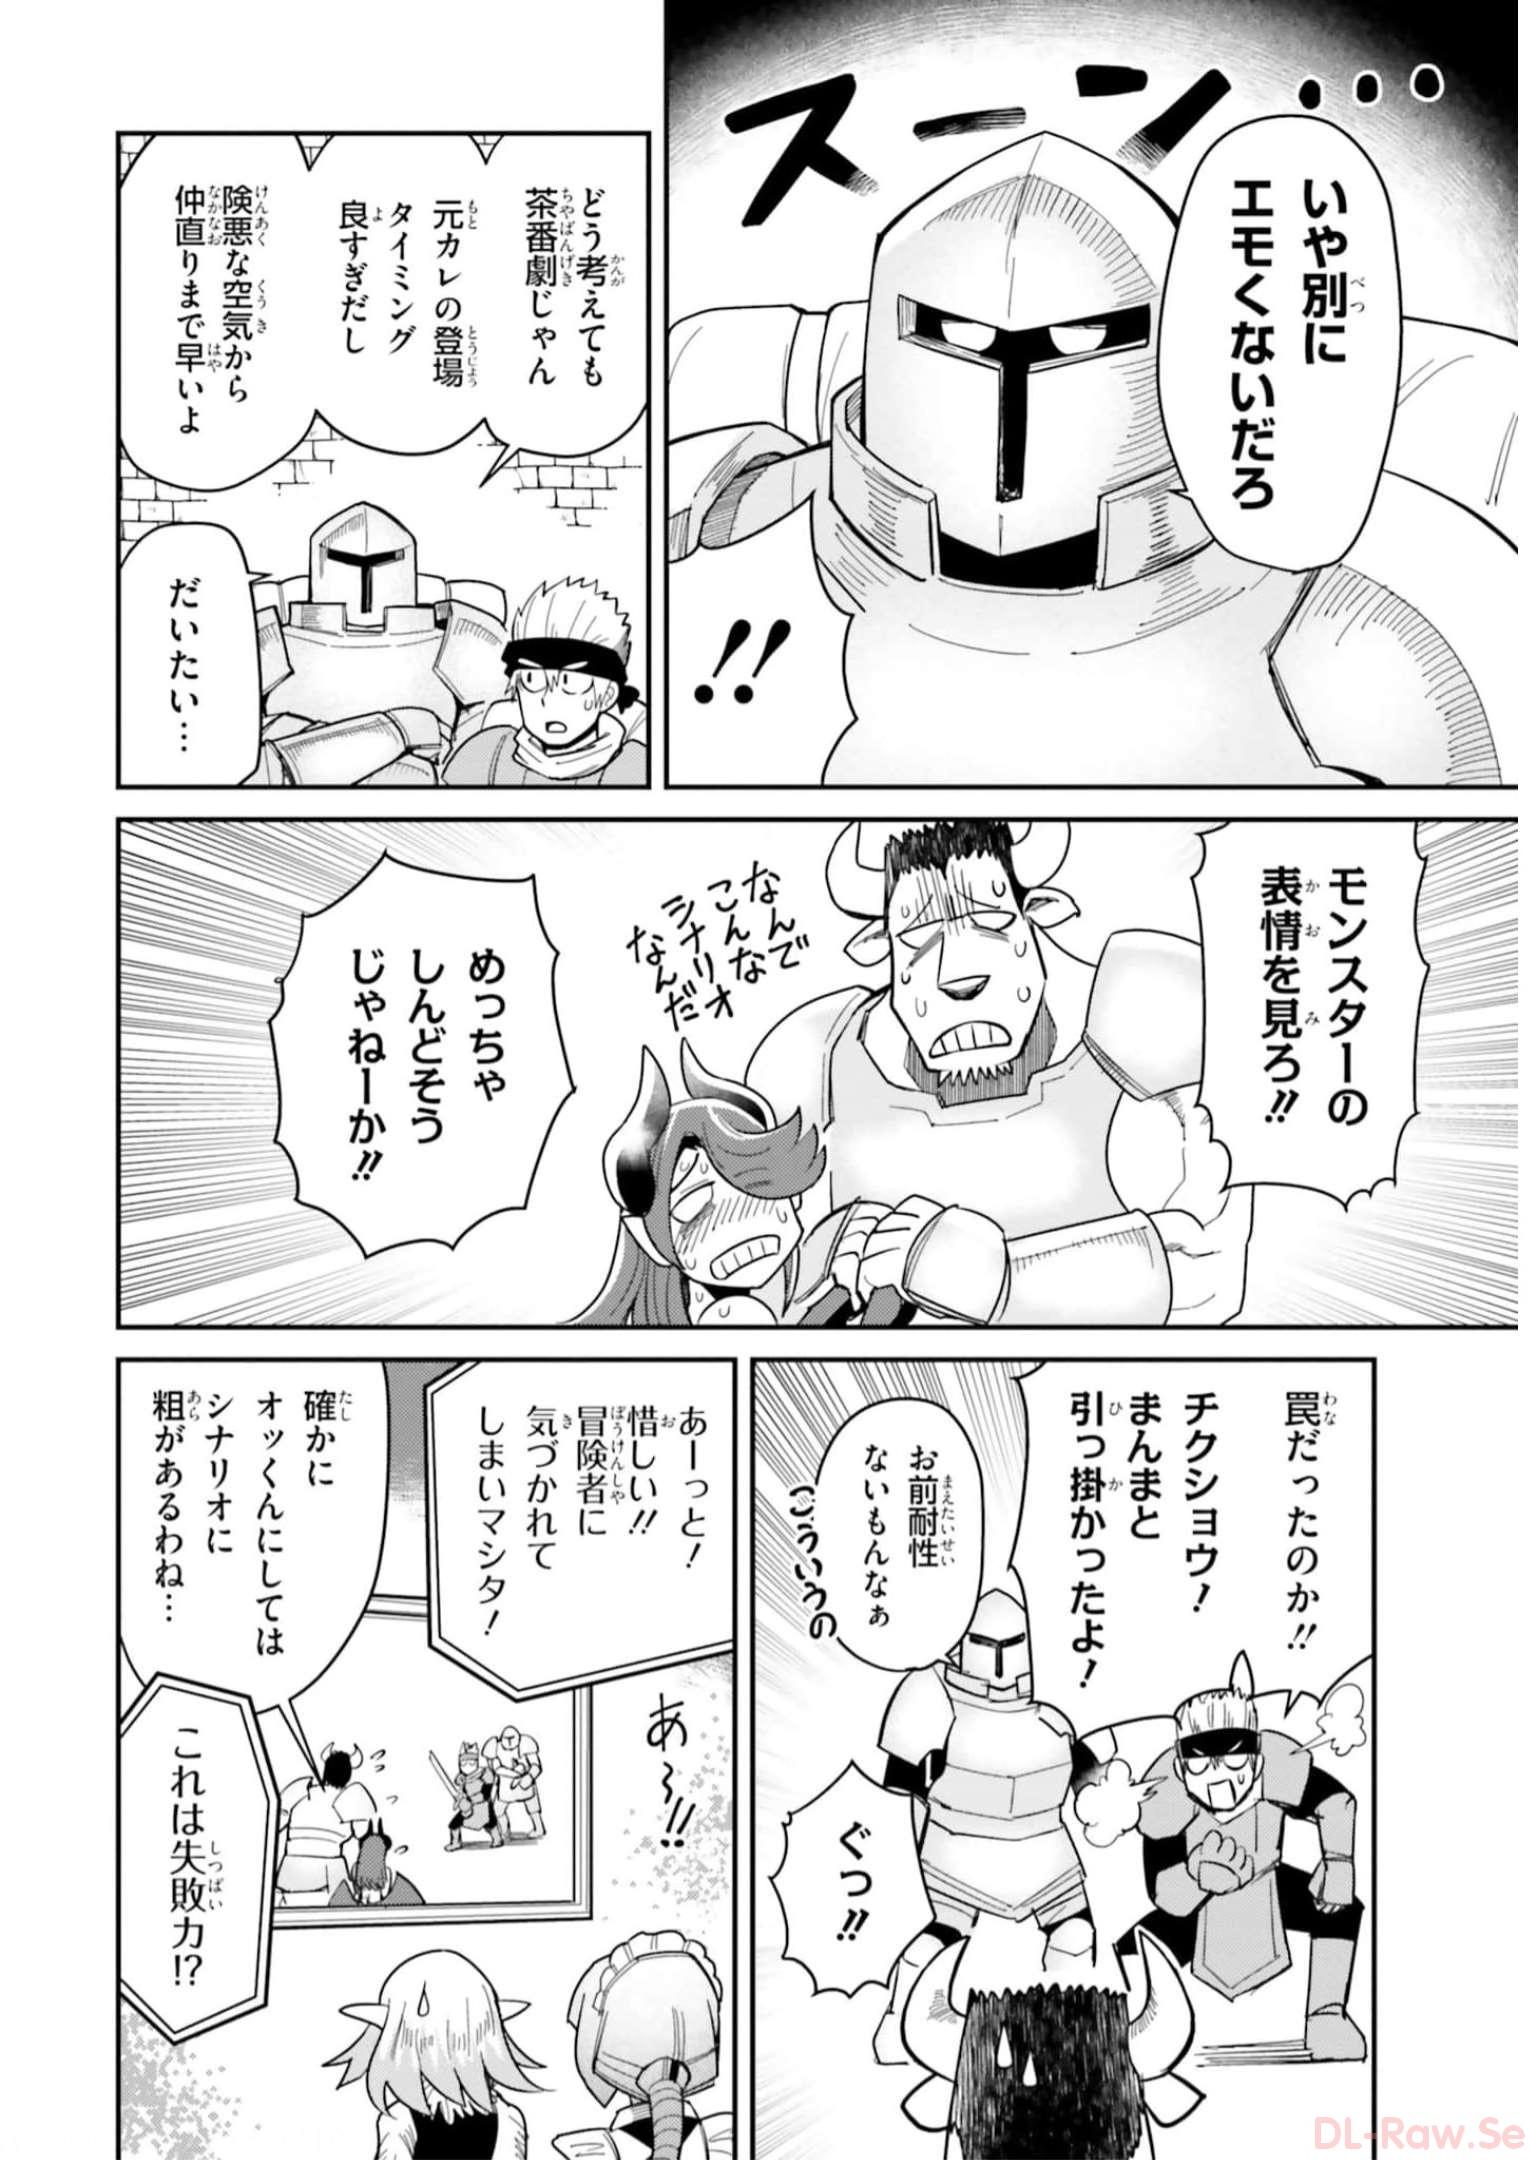 Dungeon Friends Forever Dungeon's Childhood Friend ダンジョンの幼なじみ 第20話 - Page 16